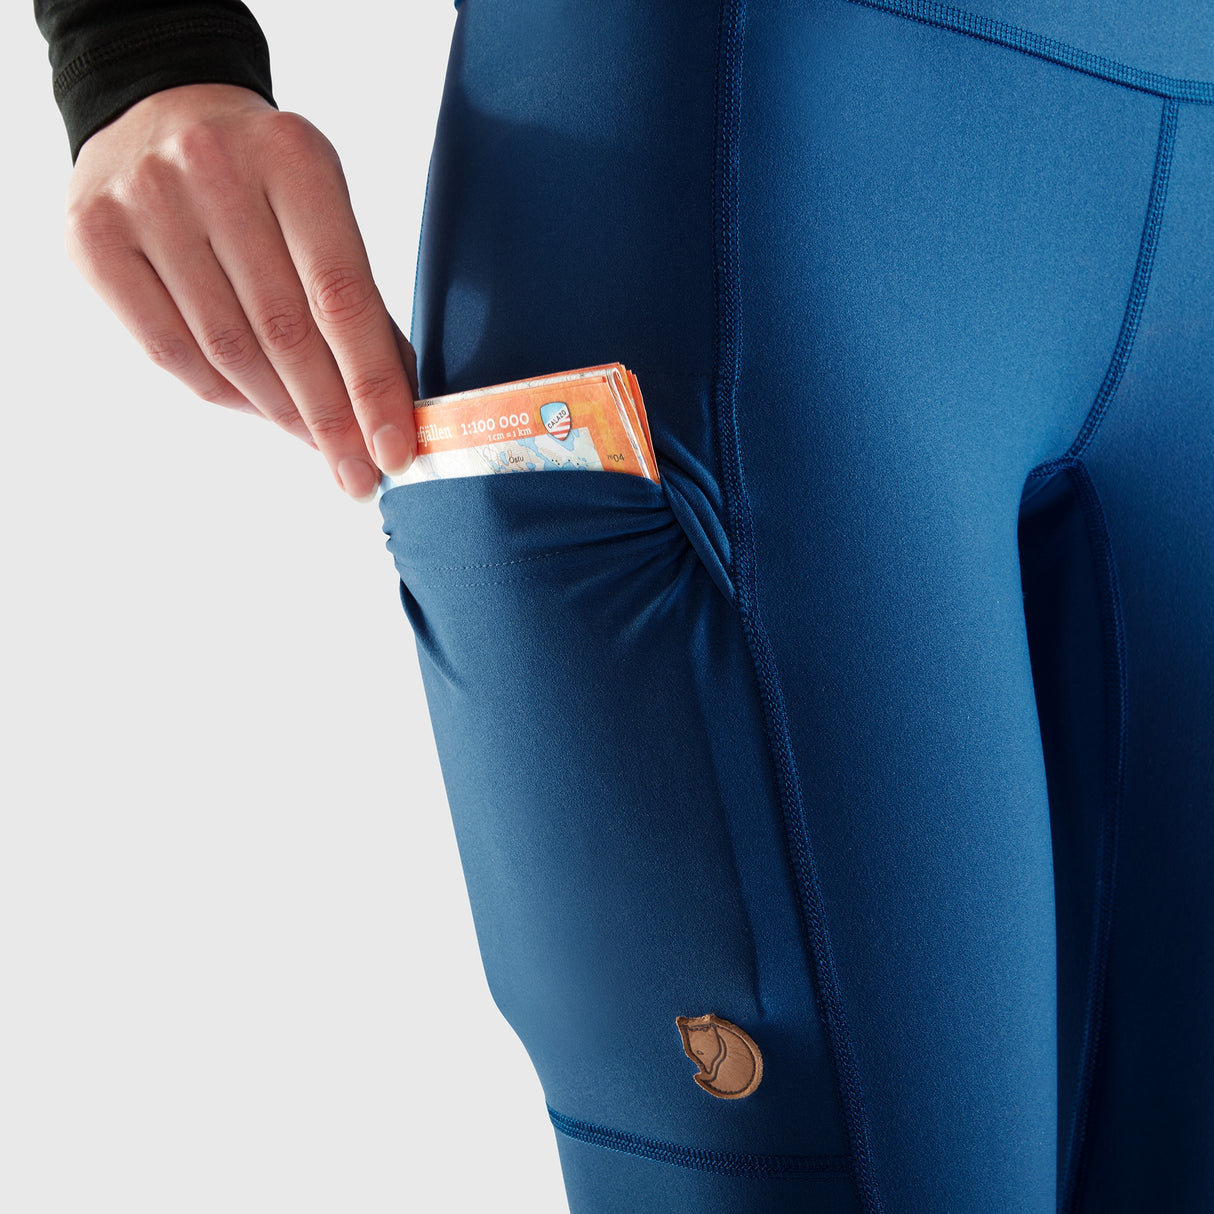 Zippered Security Pocket: Offers additional storage for valuables.